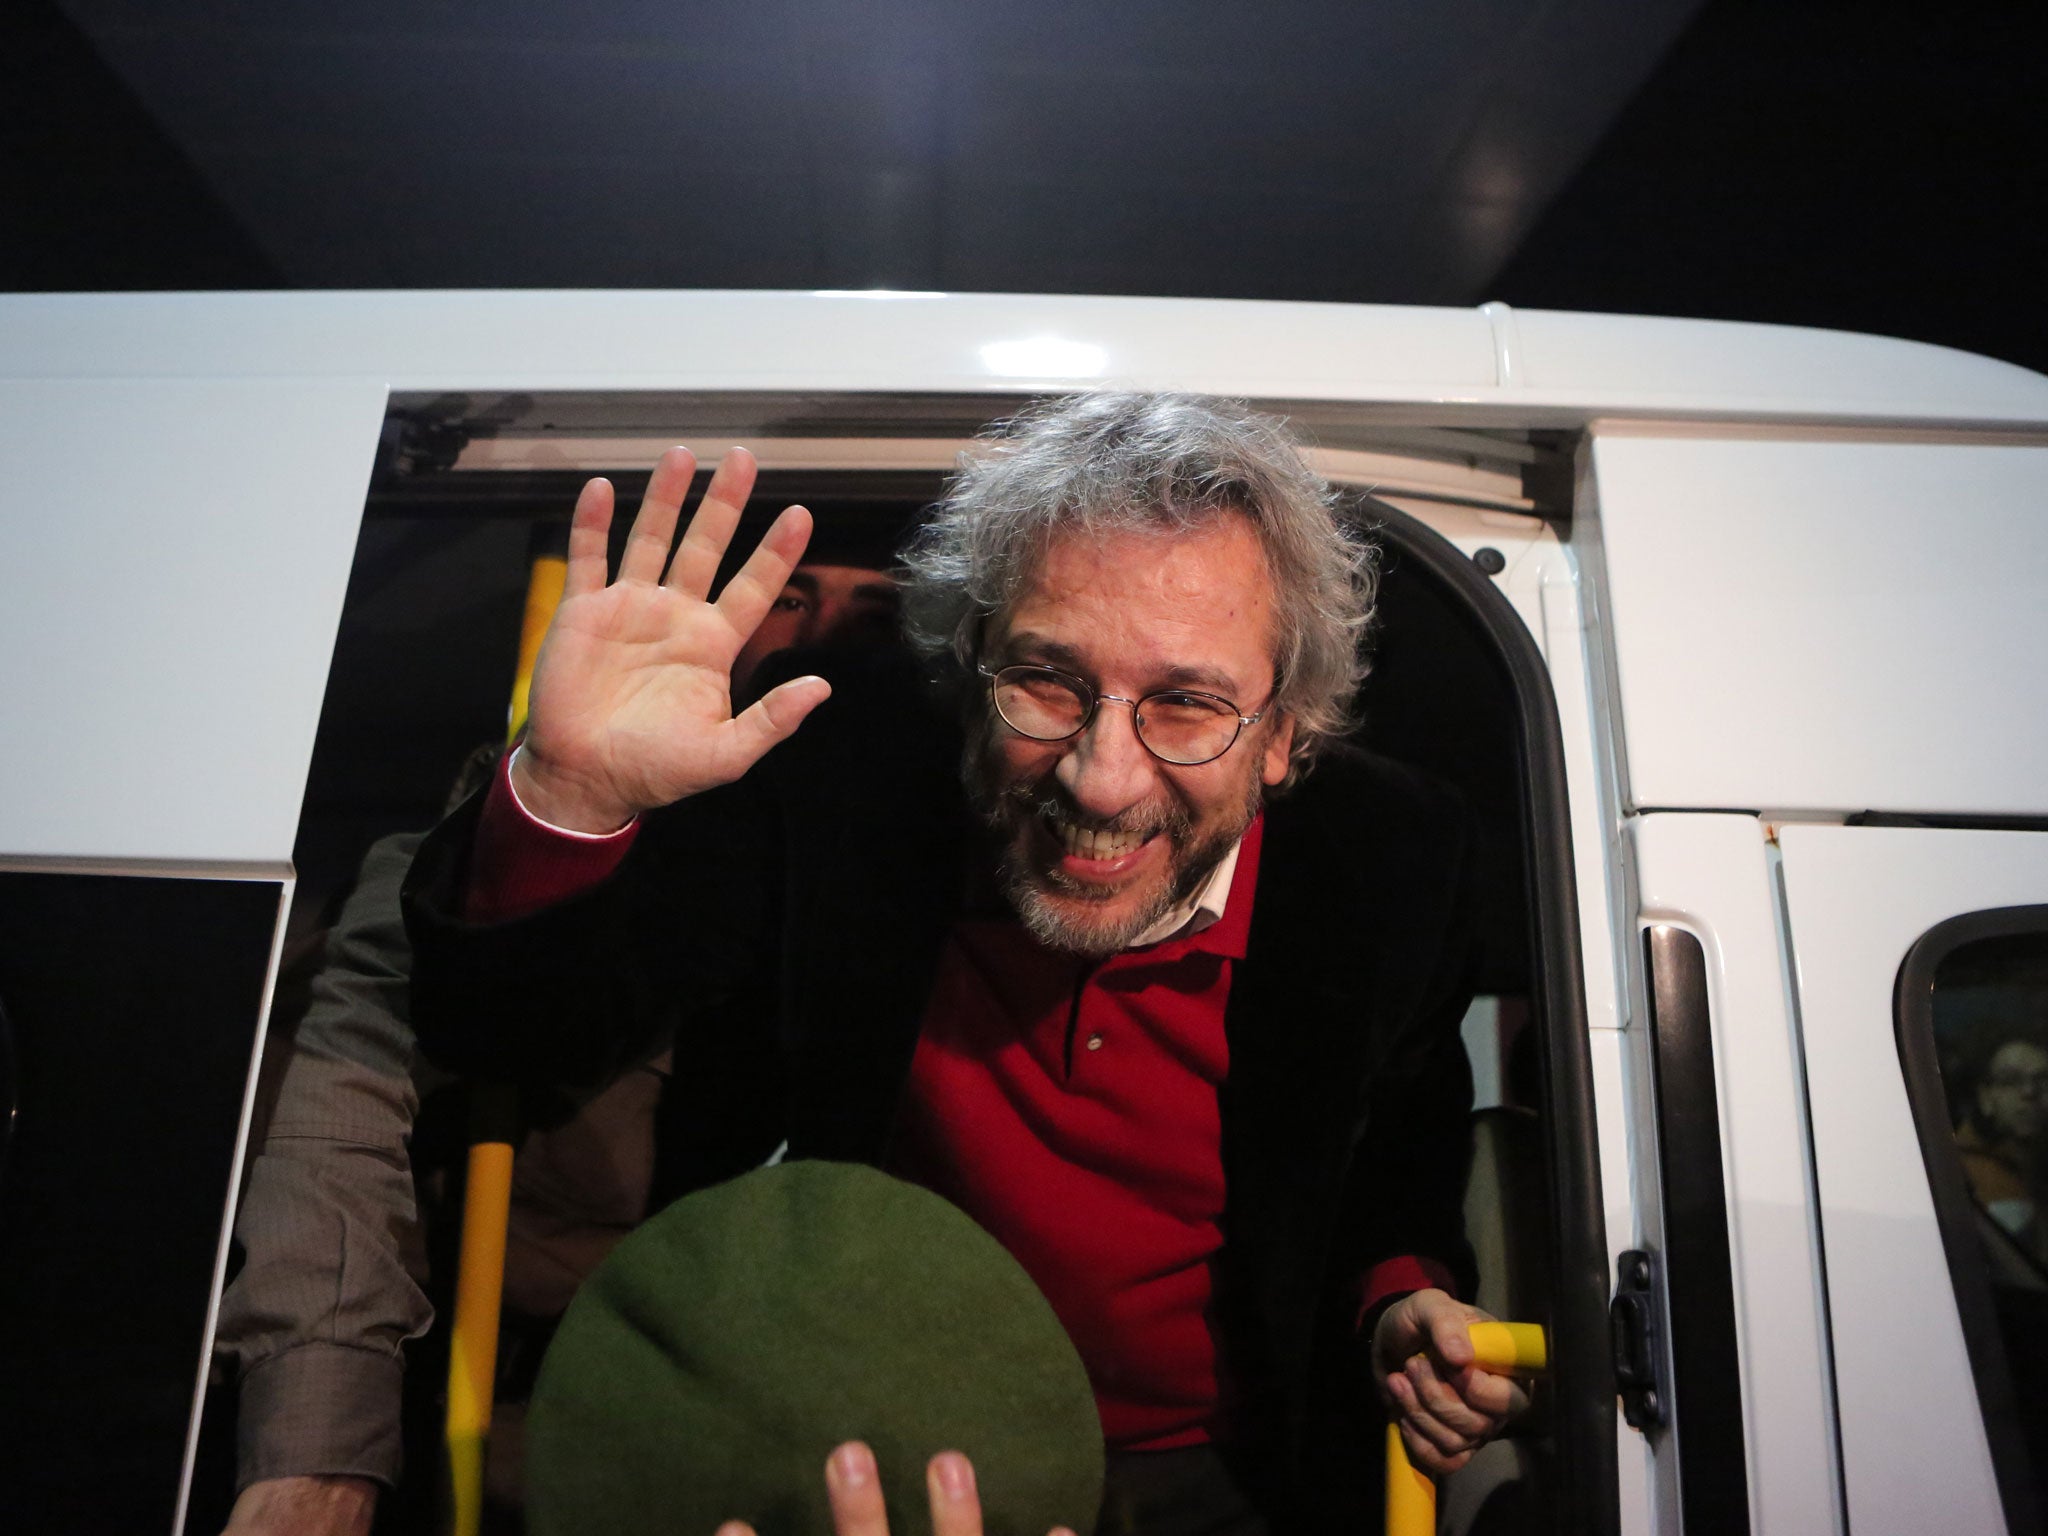 President Erdoğan has criticised Turkey's top court for releasing journalist Can Dündar, who has been charged with attempting to overthrow the government